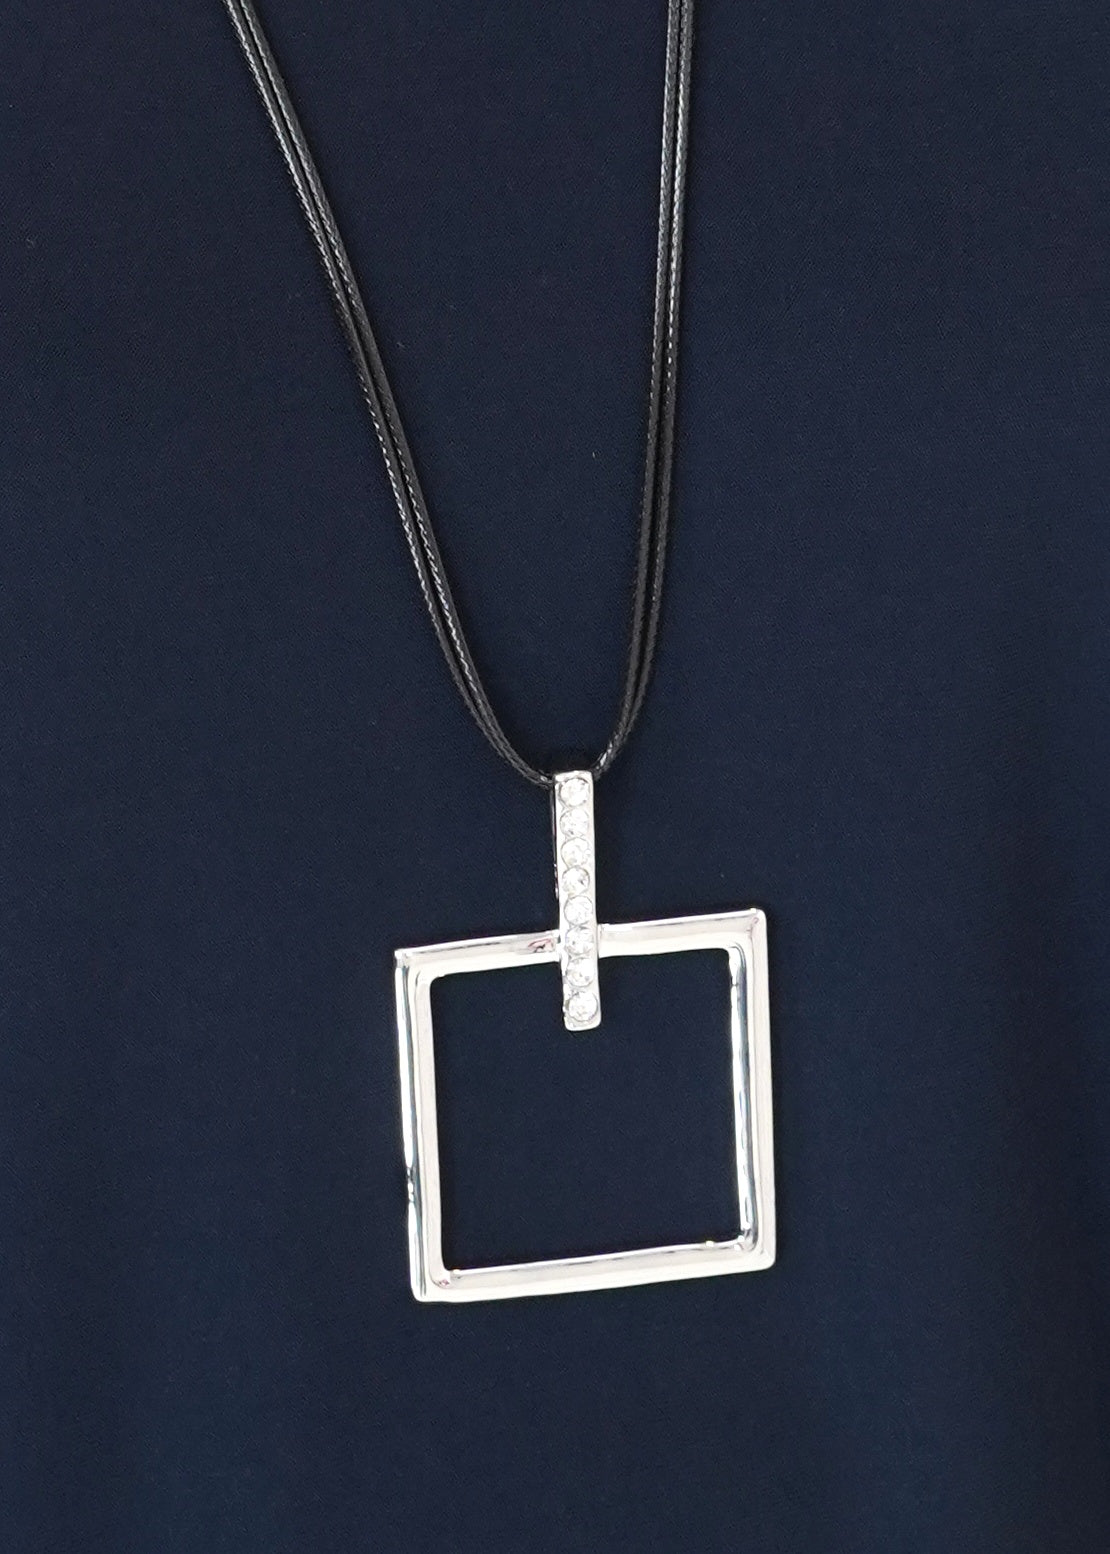 Long Necklace with Square Pendant and Earrings Set